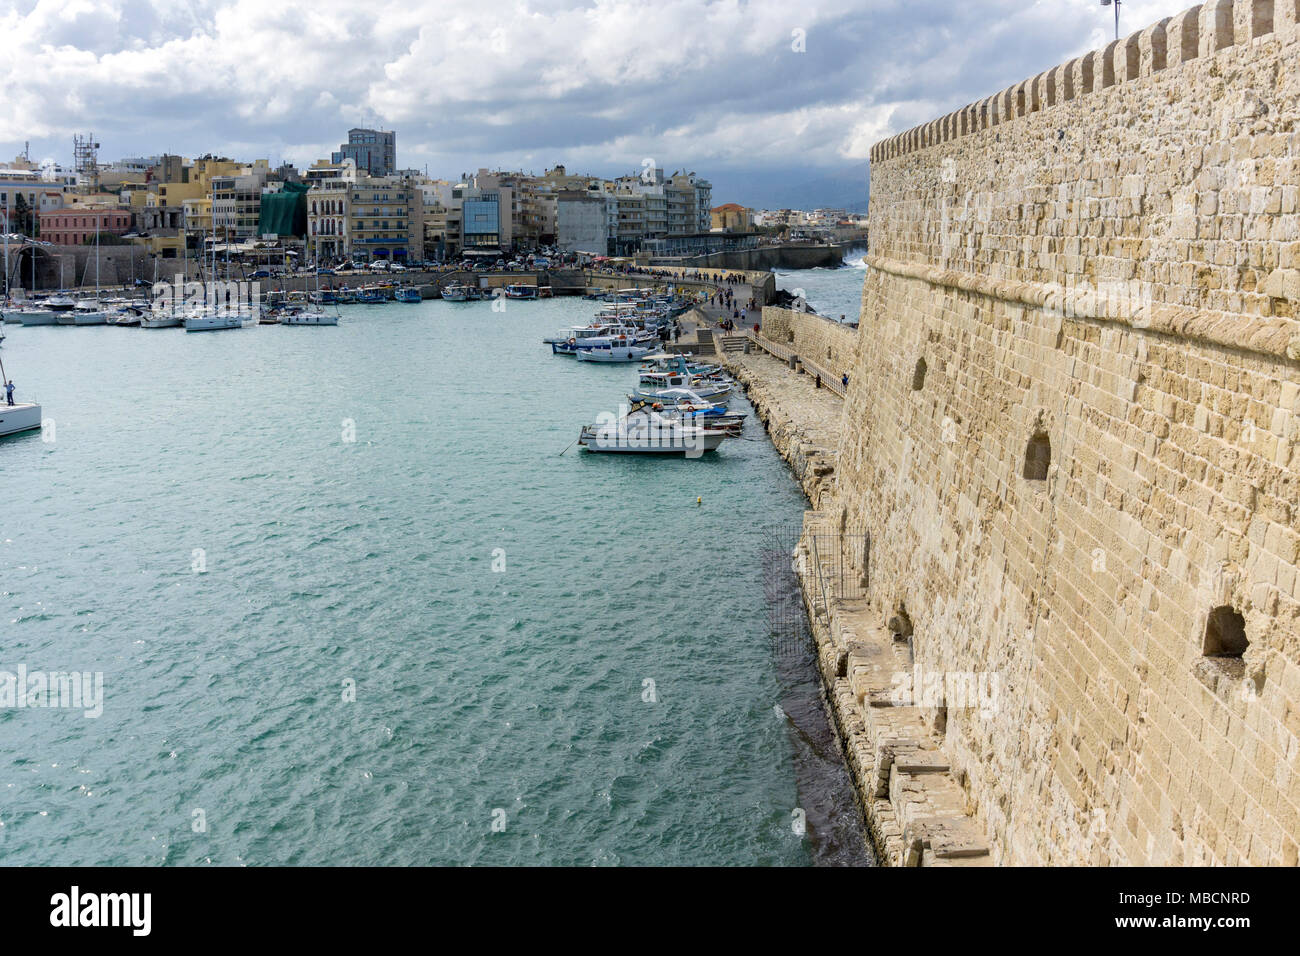 Panoramic view of the city of Heraklion in Crete, Greece showing a part of the fortress "Koules" (castello a mare) Stock Photo